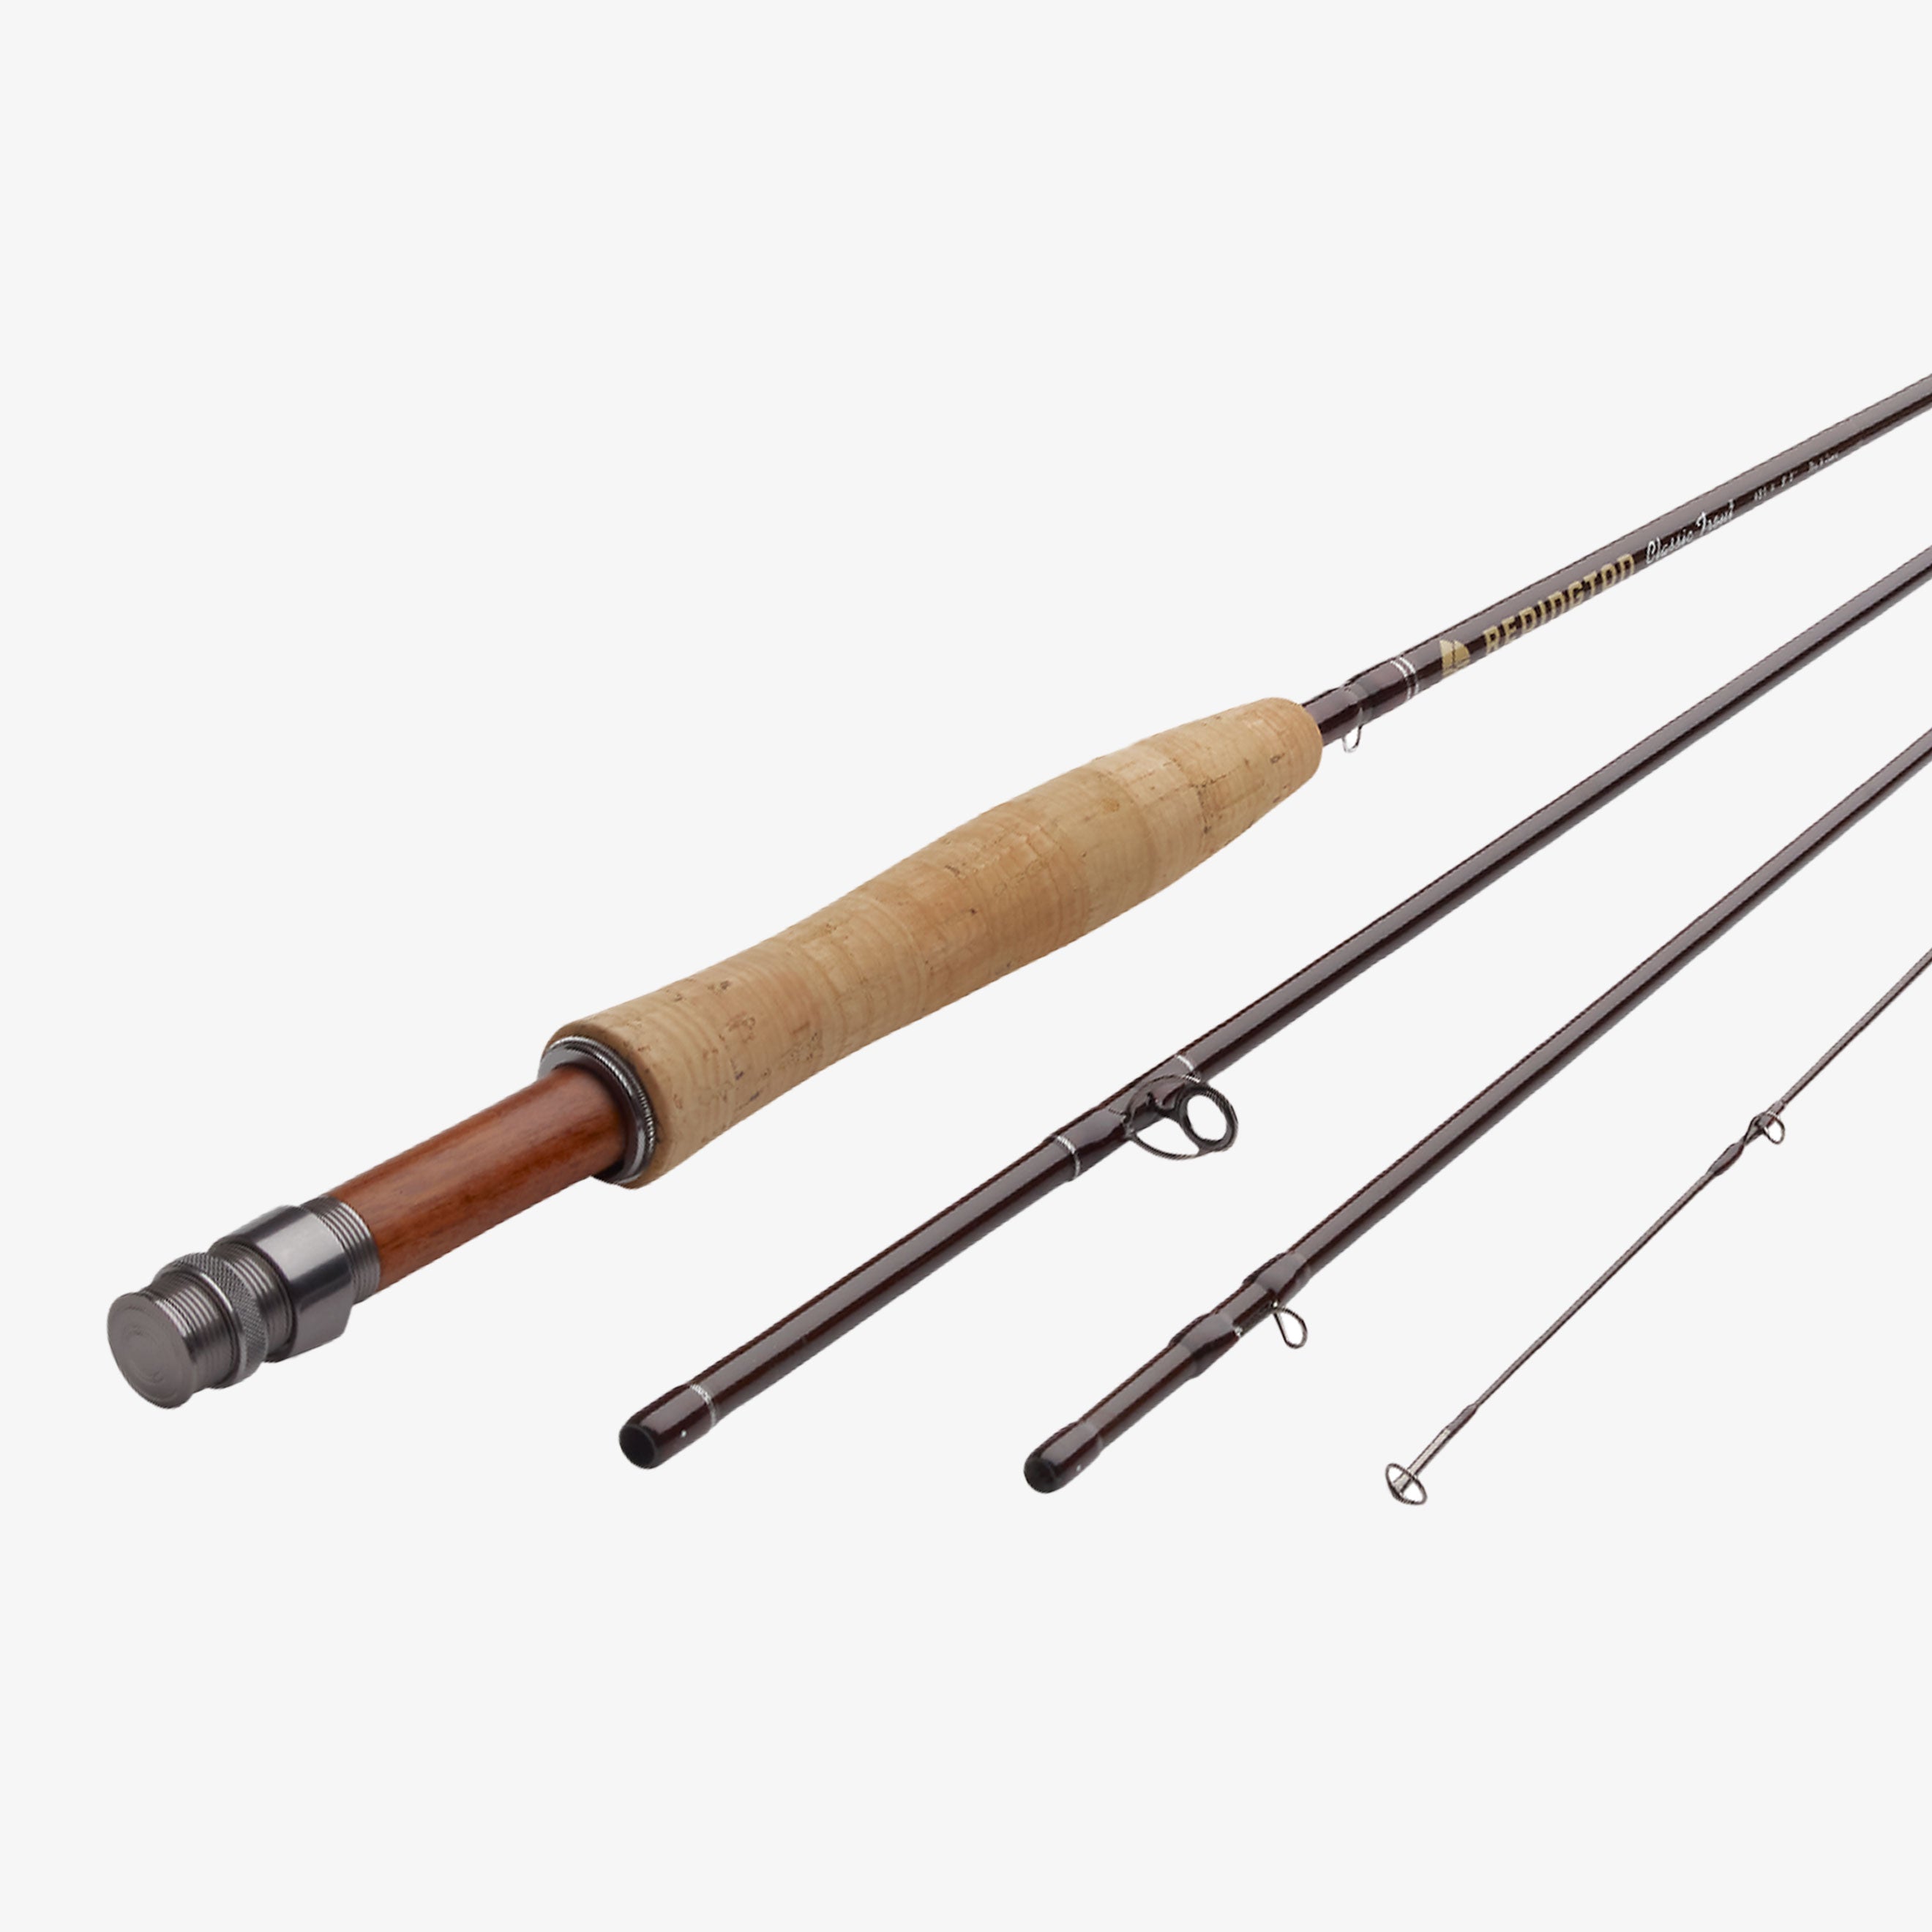 CLASSIC TROUT Fly Fishing Rod 2 Weight, 7ft 6in